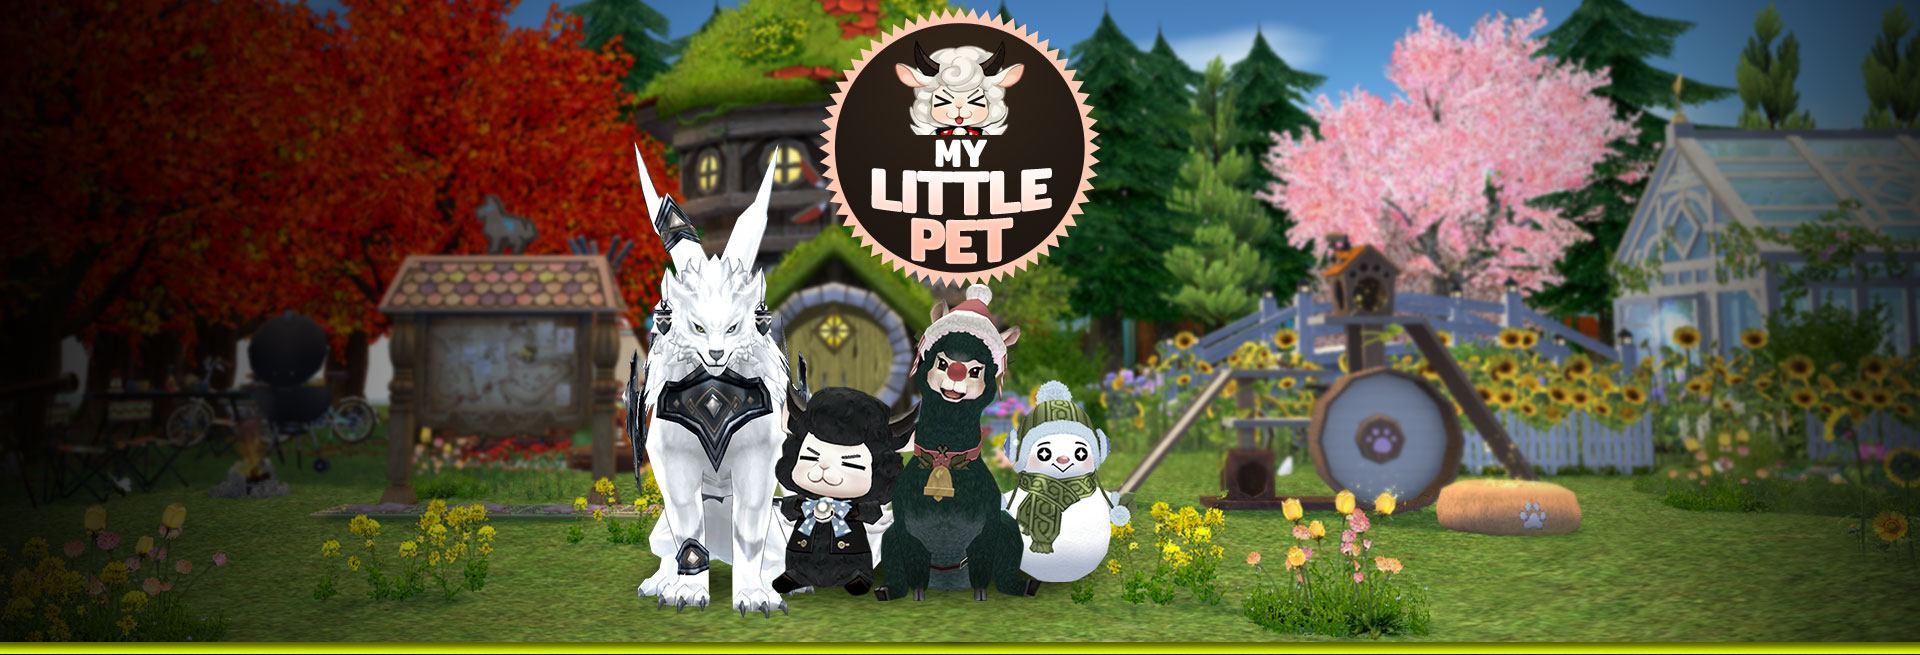 Pet Expedition Banner.jpg